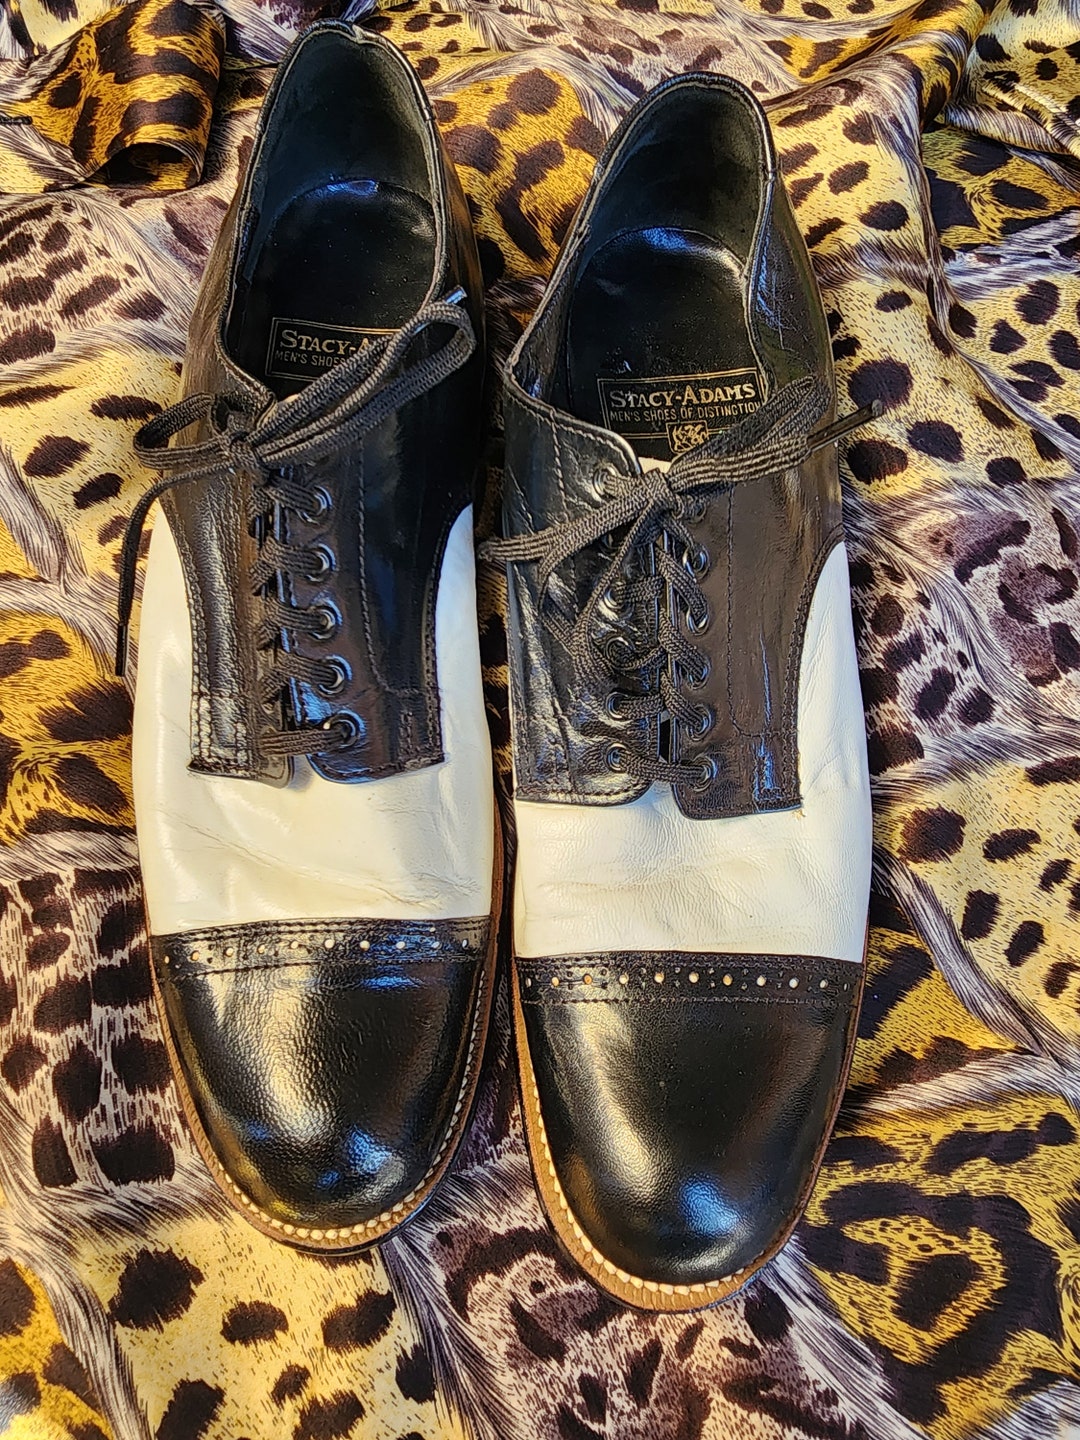 Black and White Stacy Adams Spectators Two Toned Cap Toe Ska - Etsy